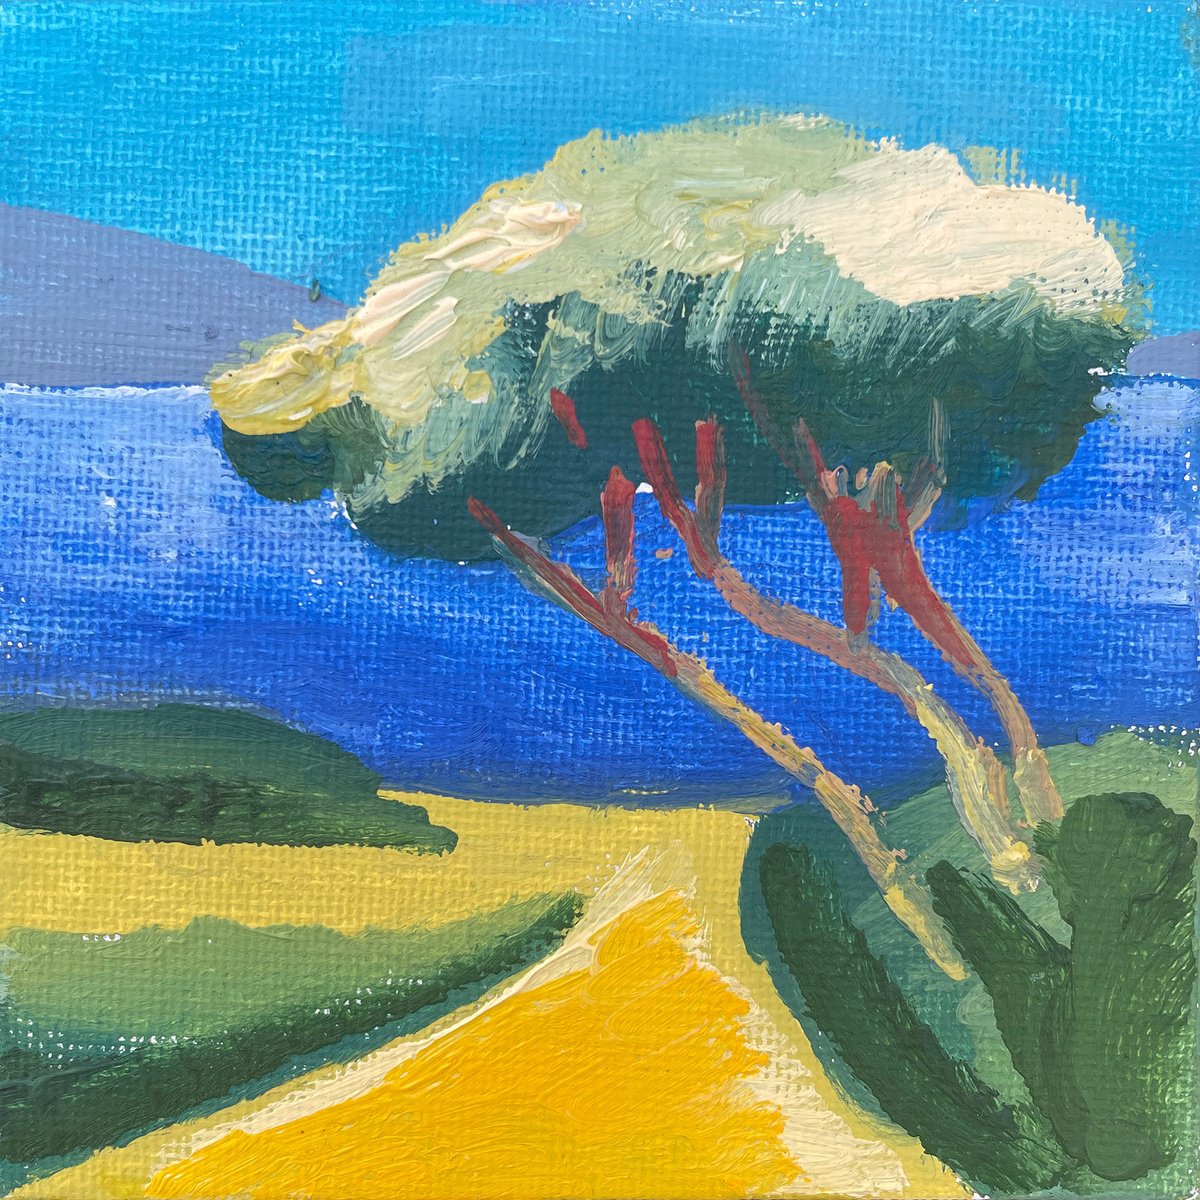 Pine overlooking the Sea - 10x10 cm by Victoria Dael